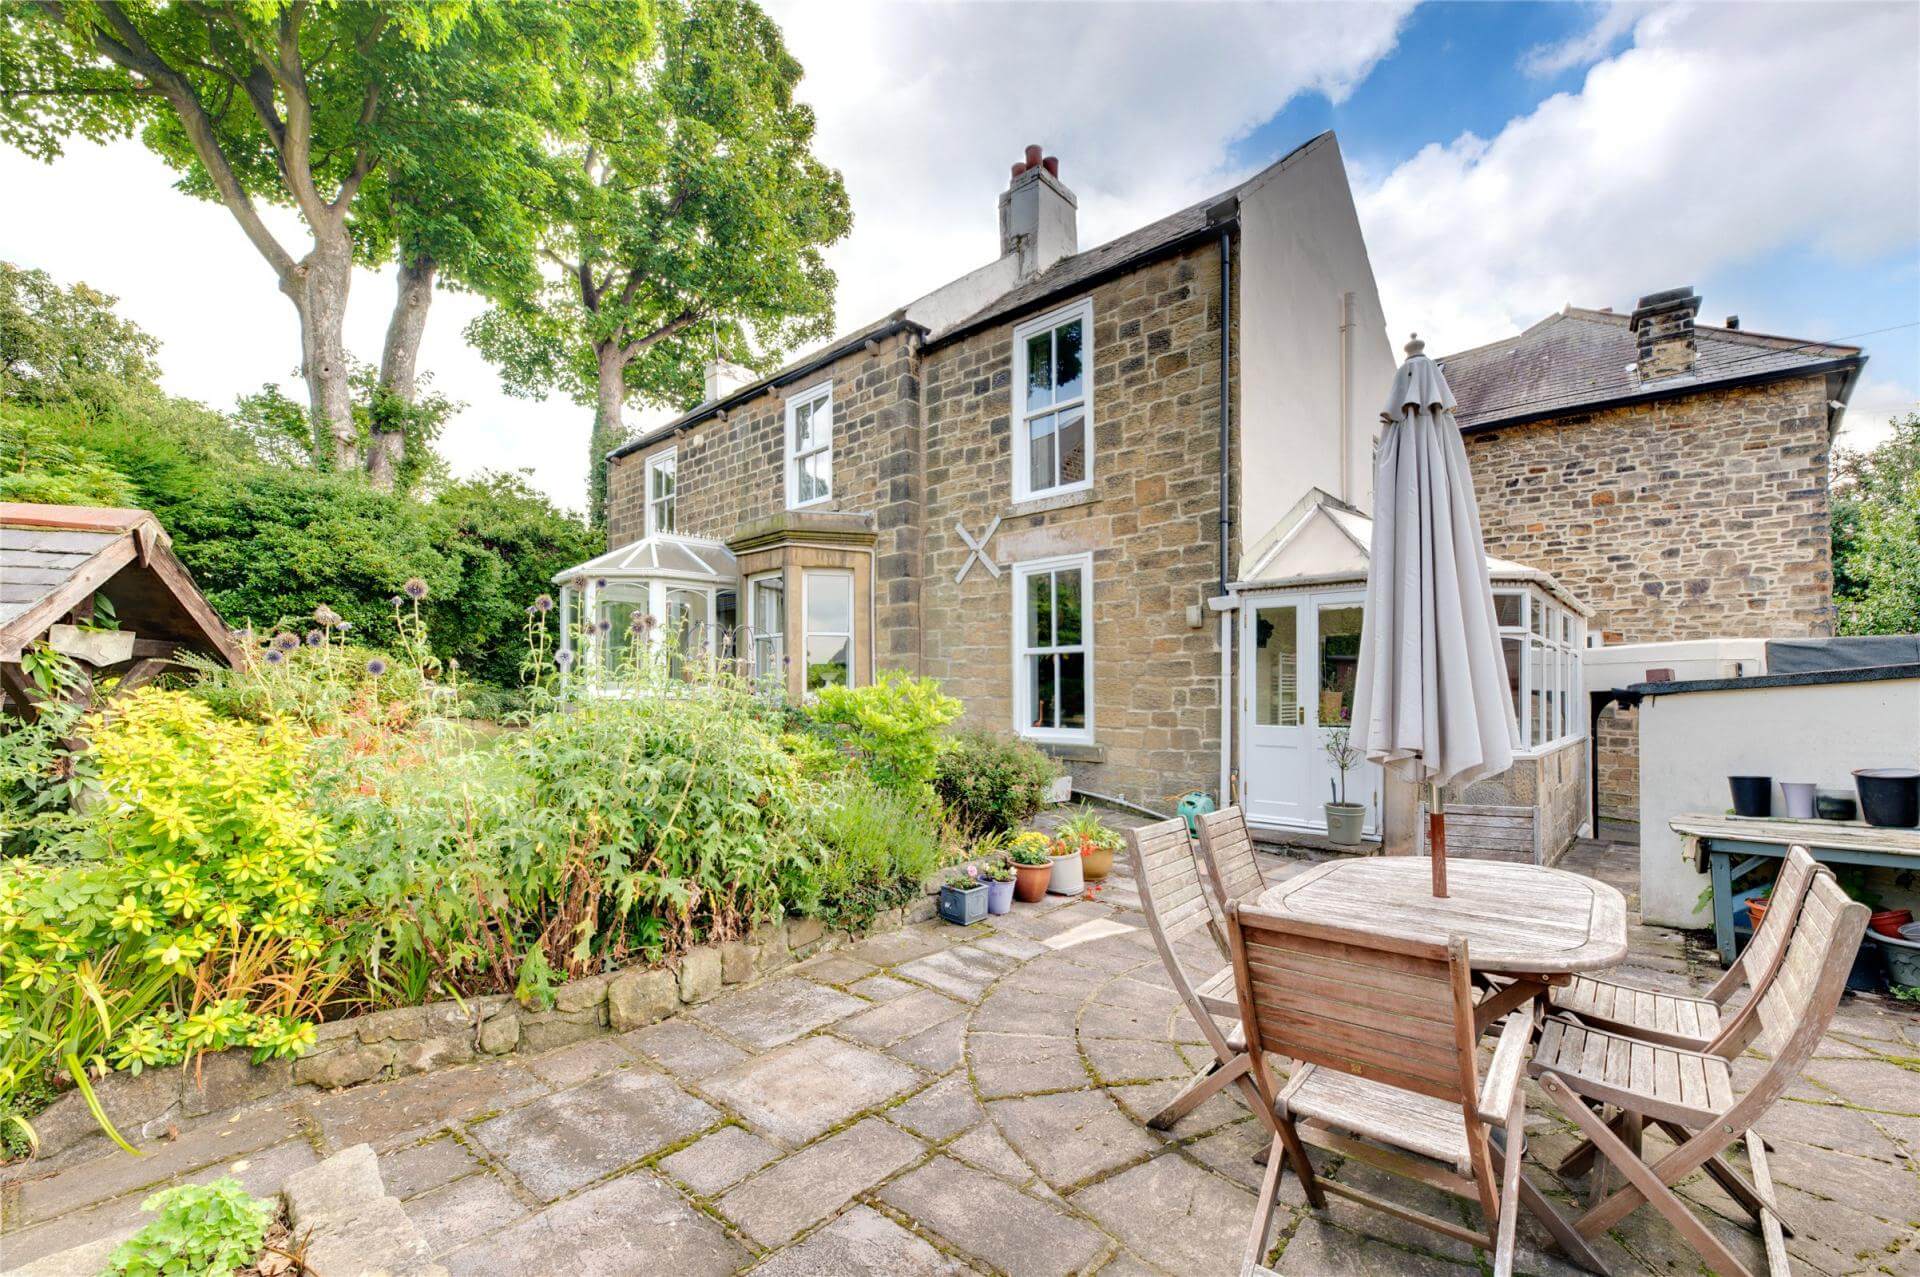 3 Bed House for Sale in Low Fell